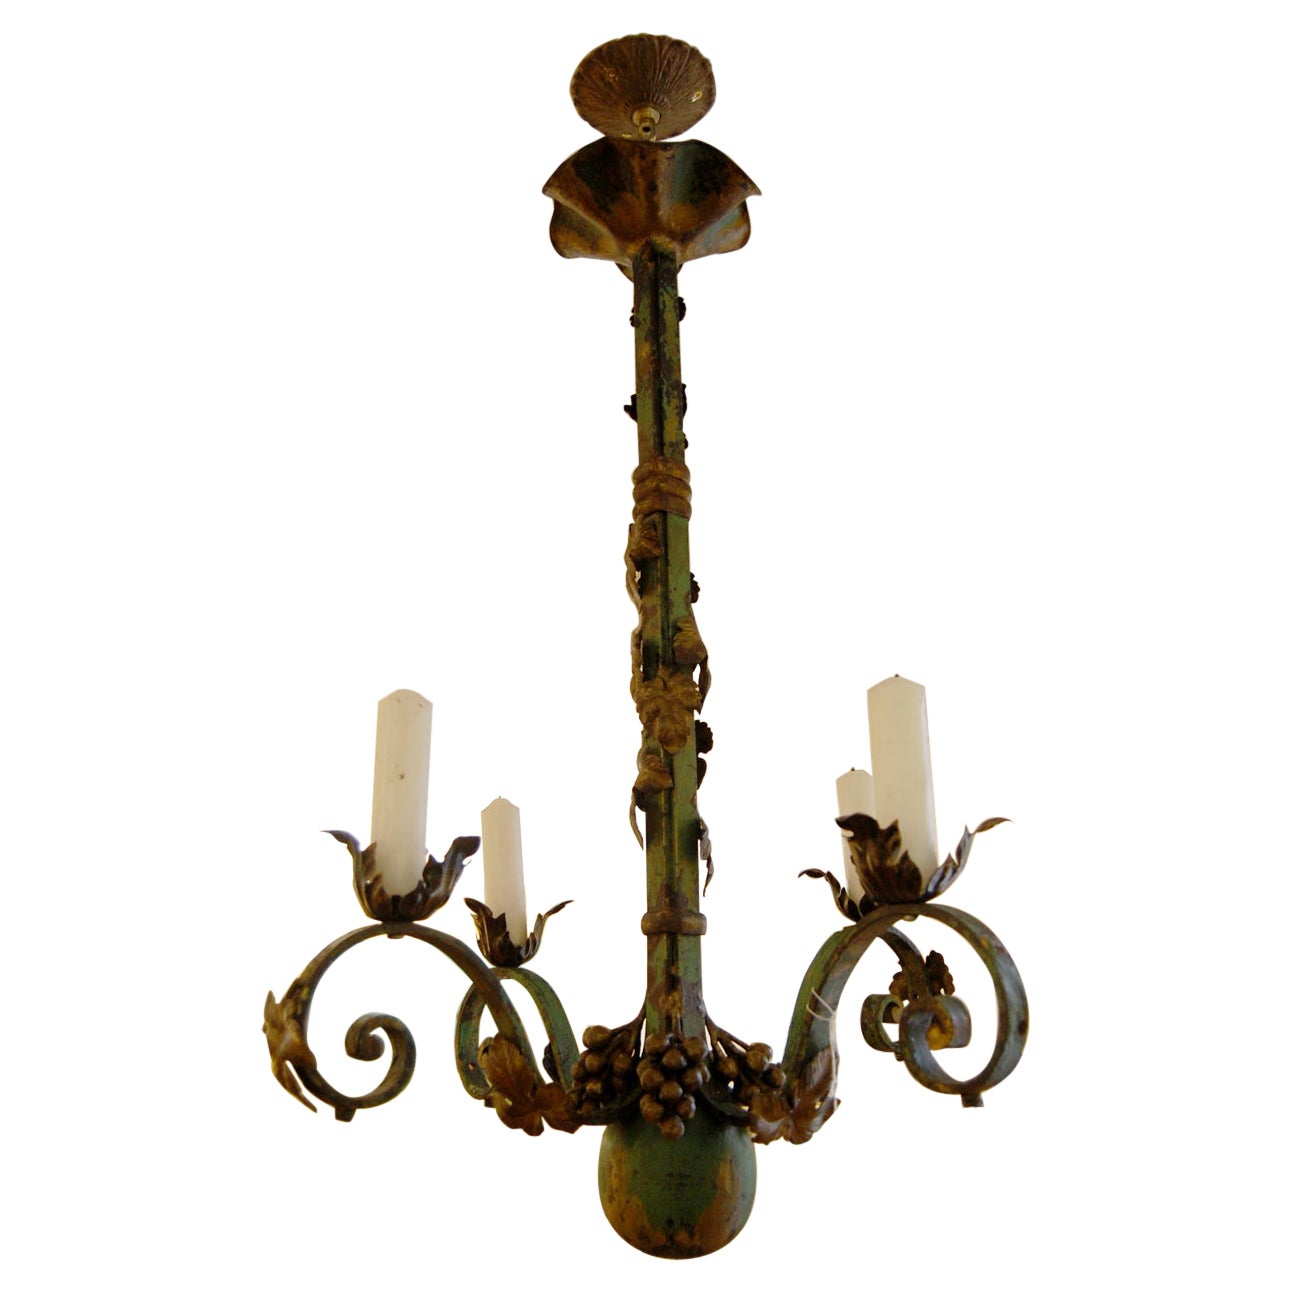 English Early 20th Century Iron Chandelier with Grape Motif, Original Paint